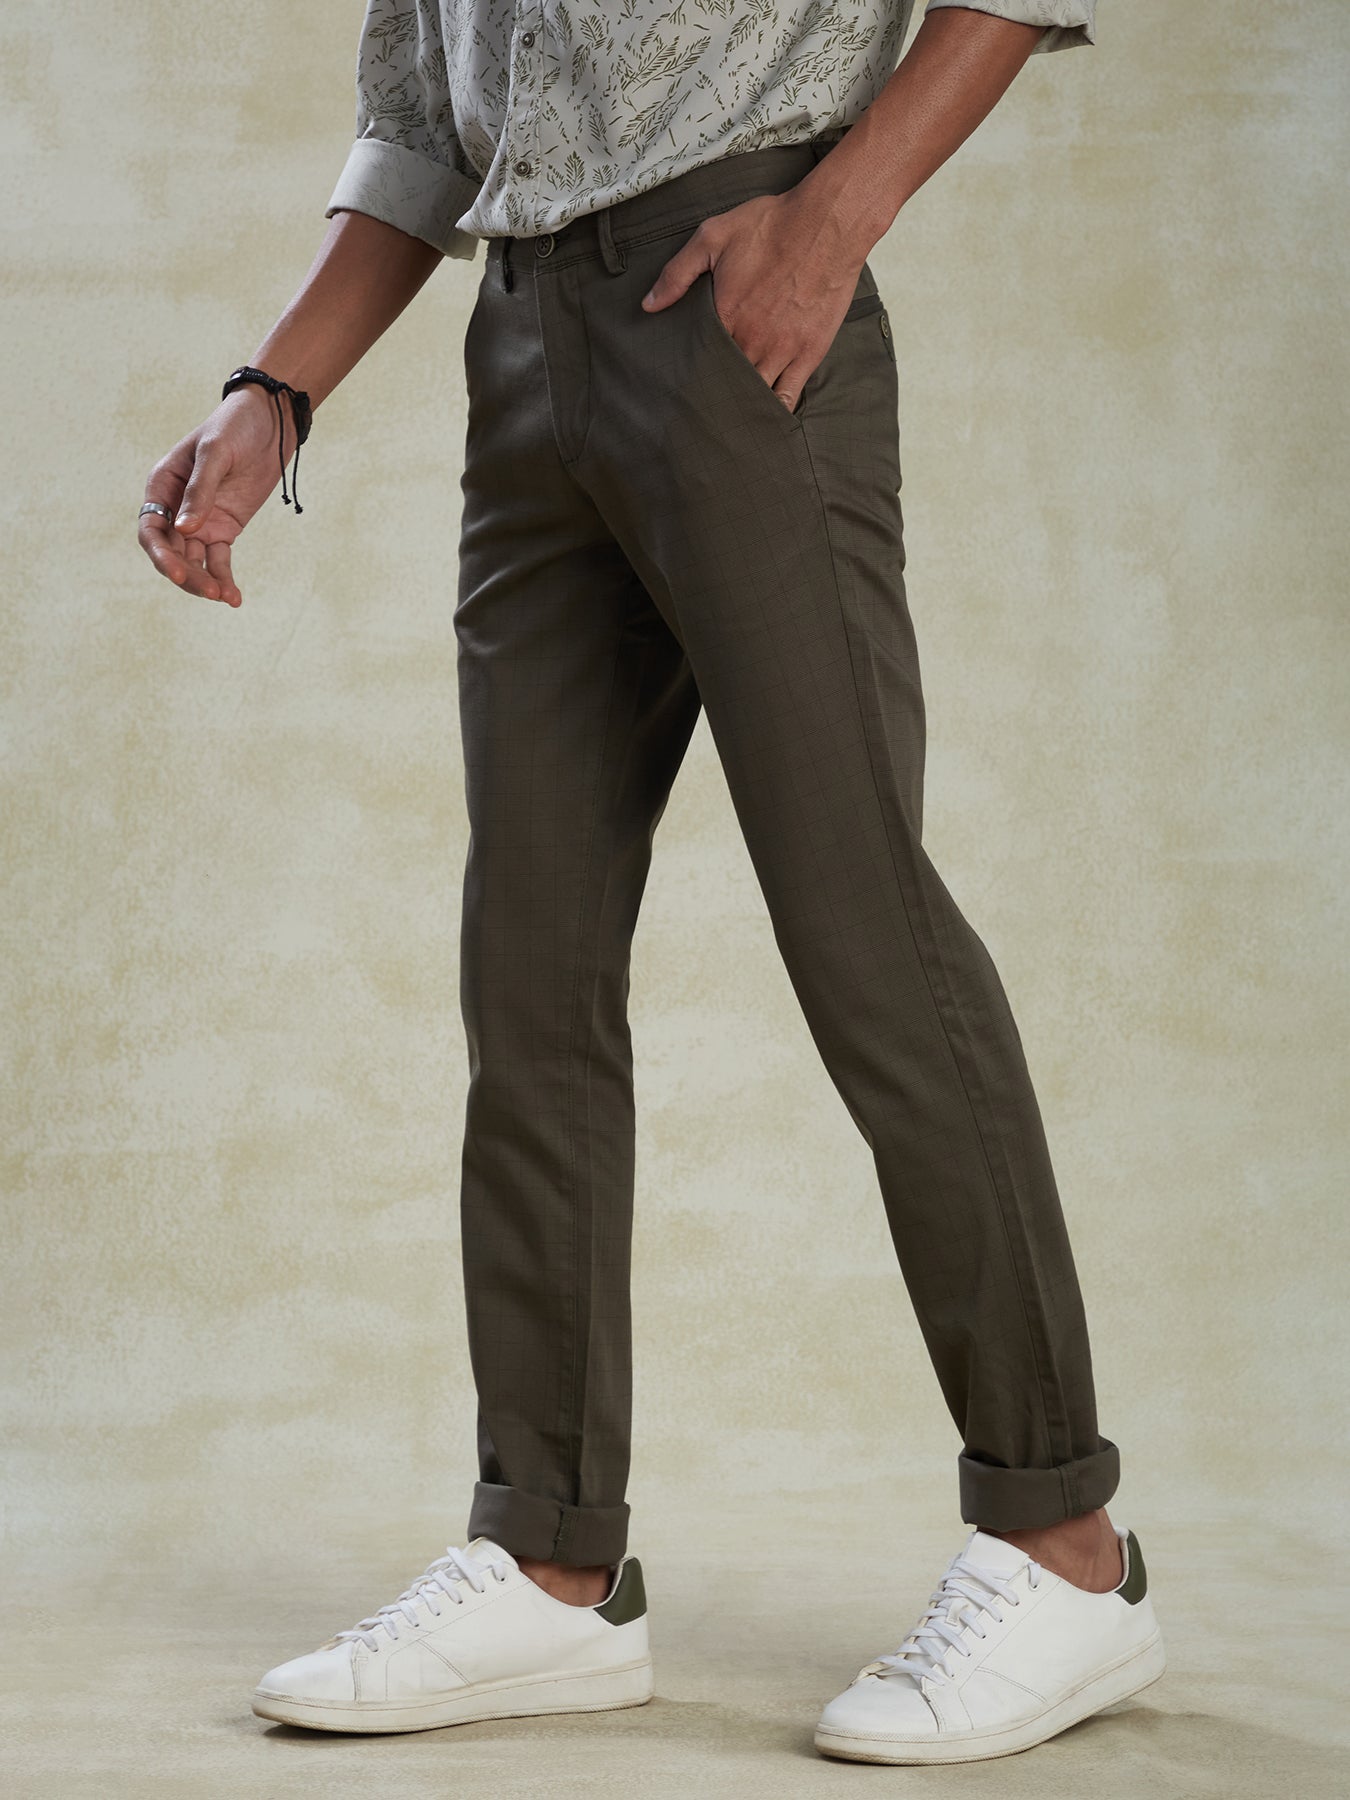 cotton-stretch-olive-green-ultra-slim-fit-flat-front-casual-mens-trouser